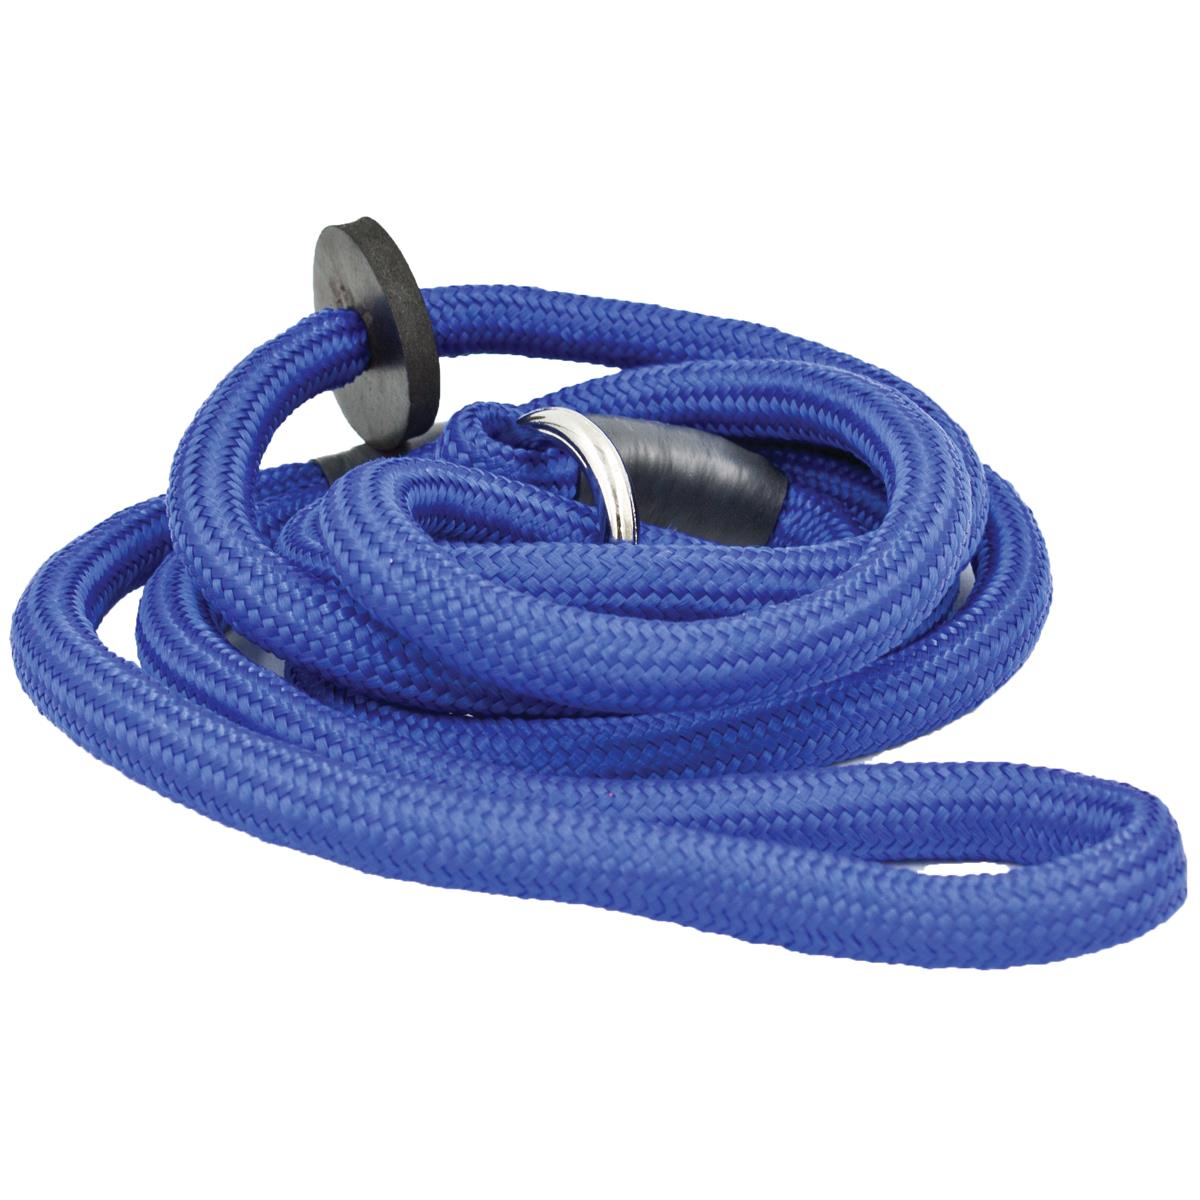 Does the Bisley Super Six Dog Lead 6mm have any stretch?